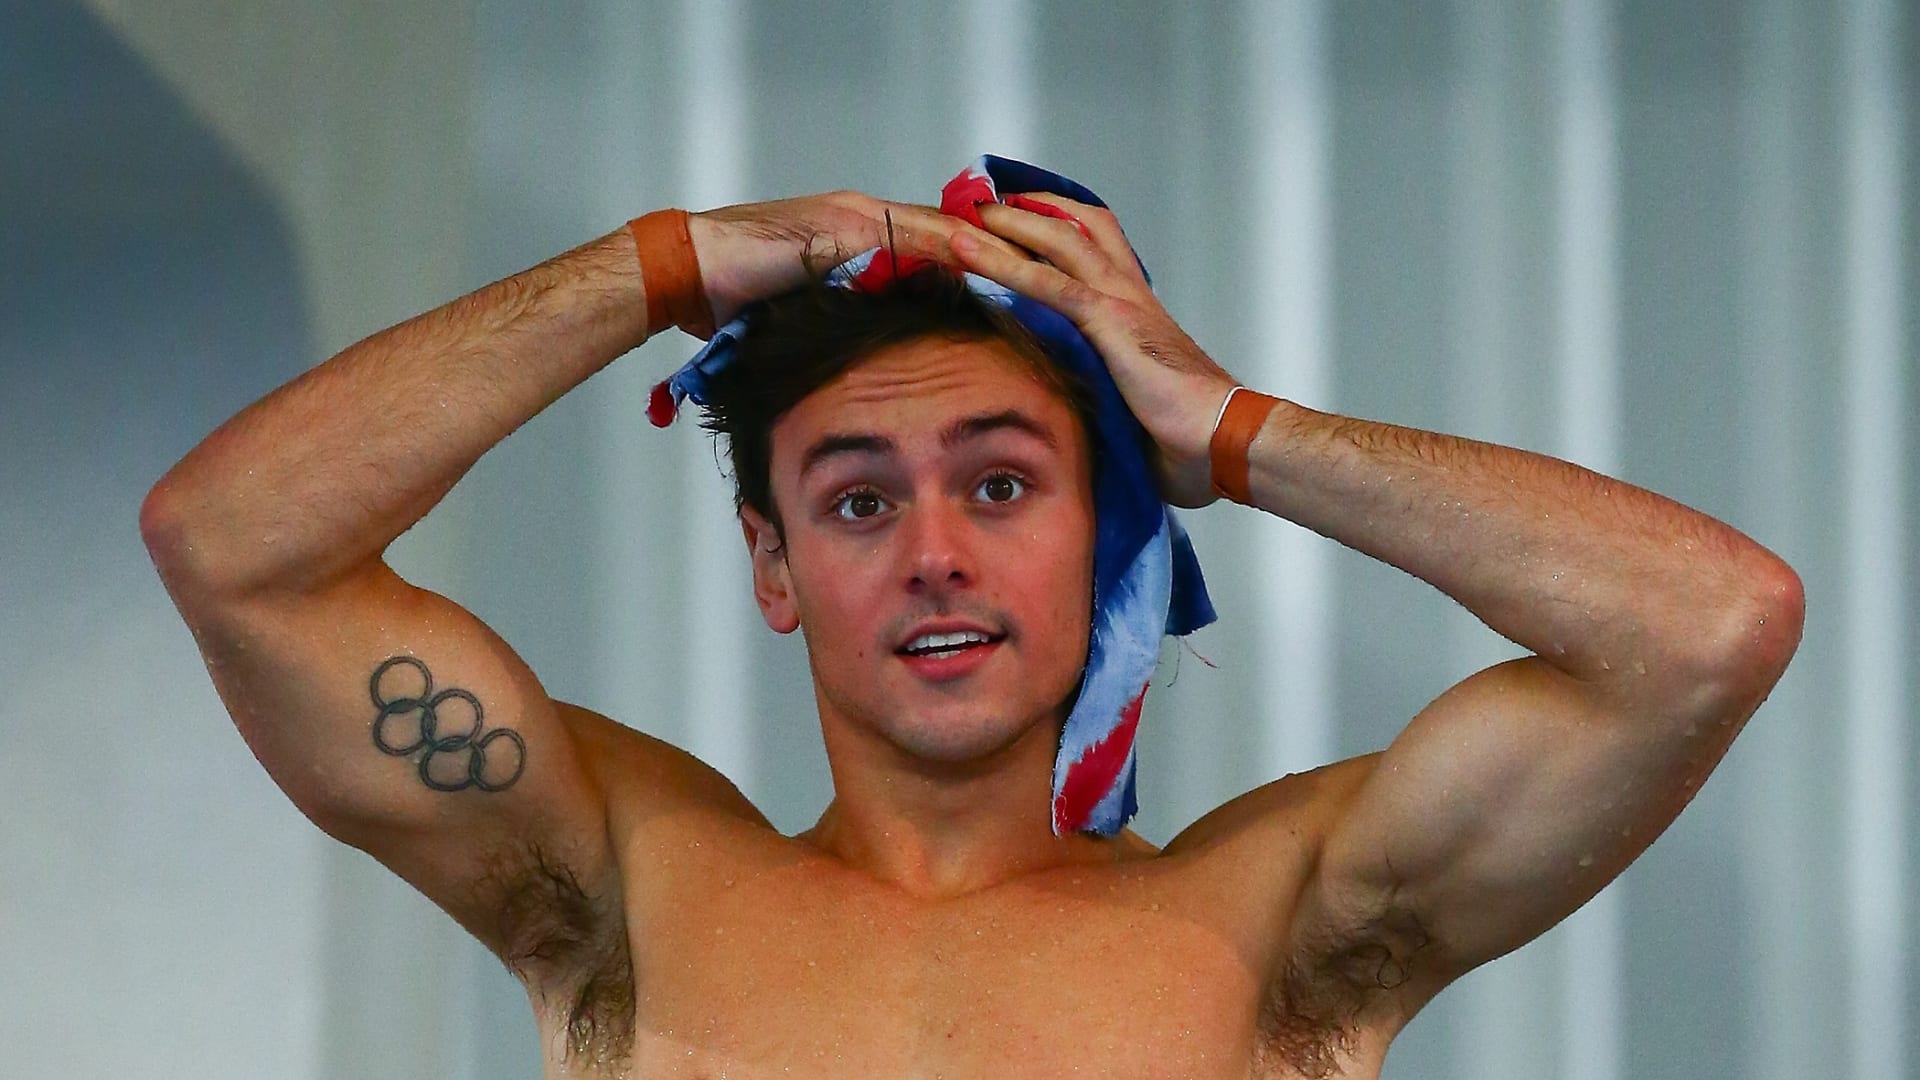 How love and meditation are inspiring Tom Daley's Olympic dream